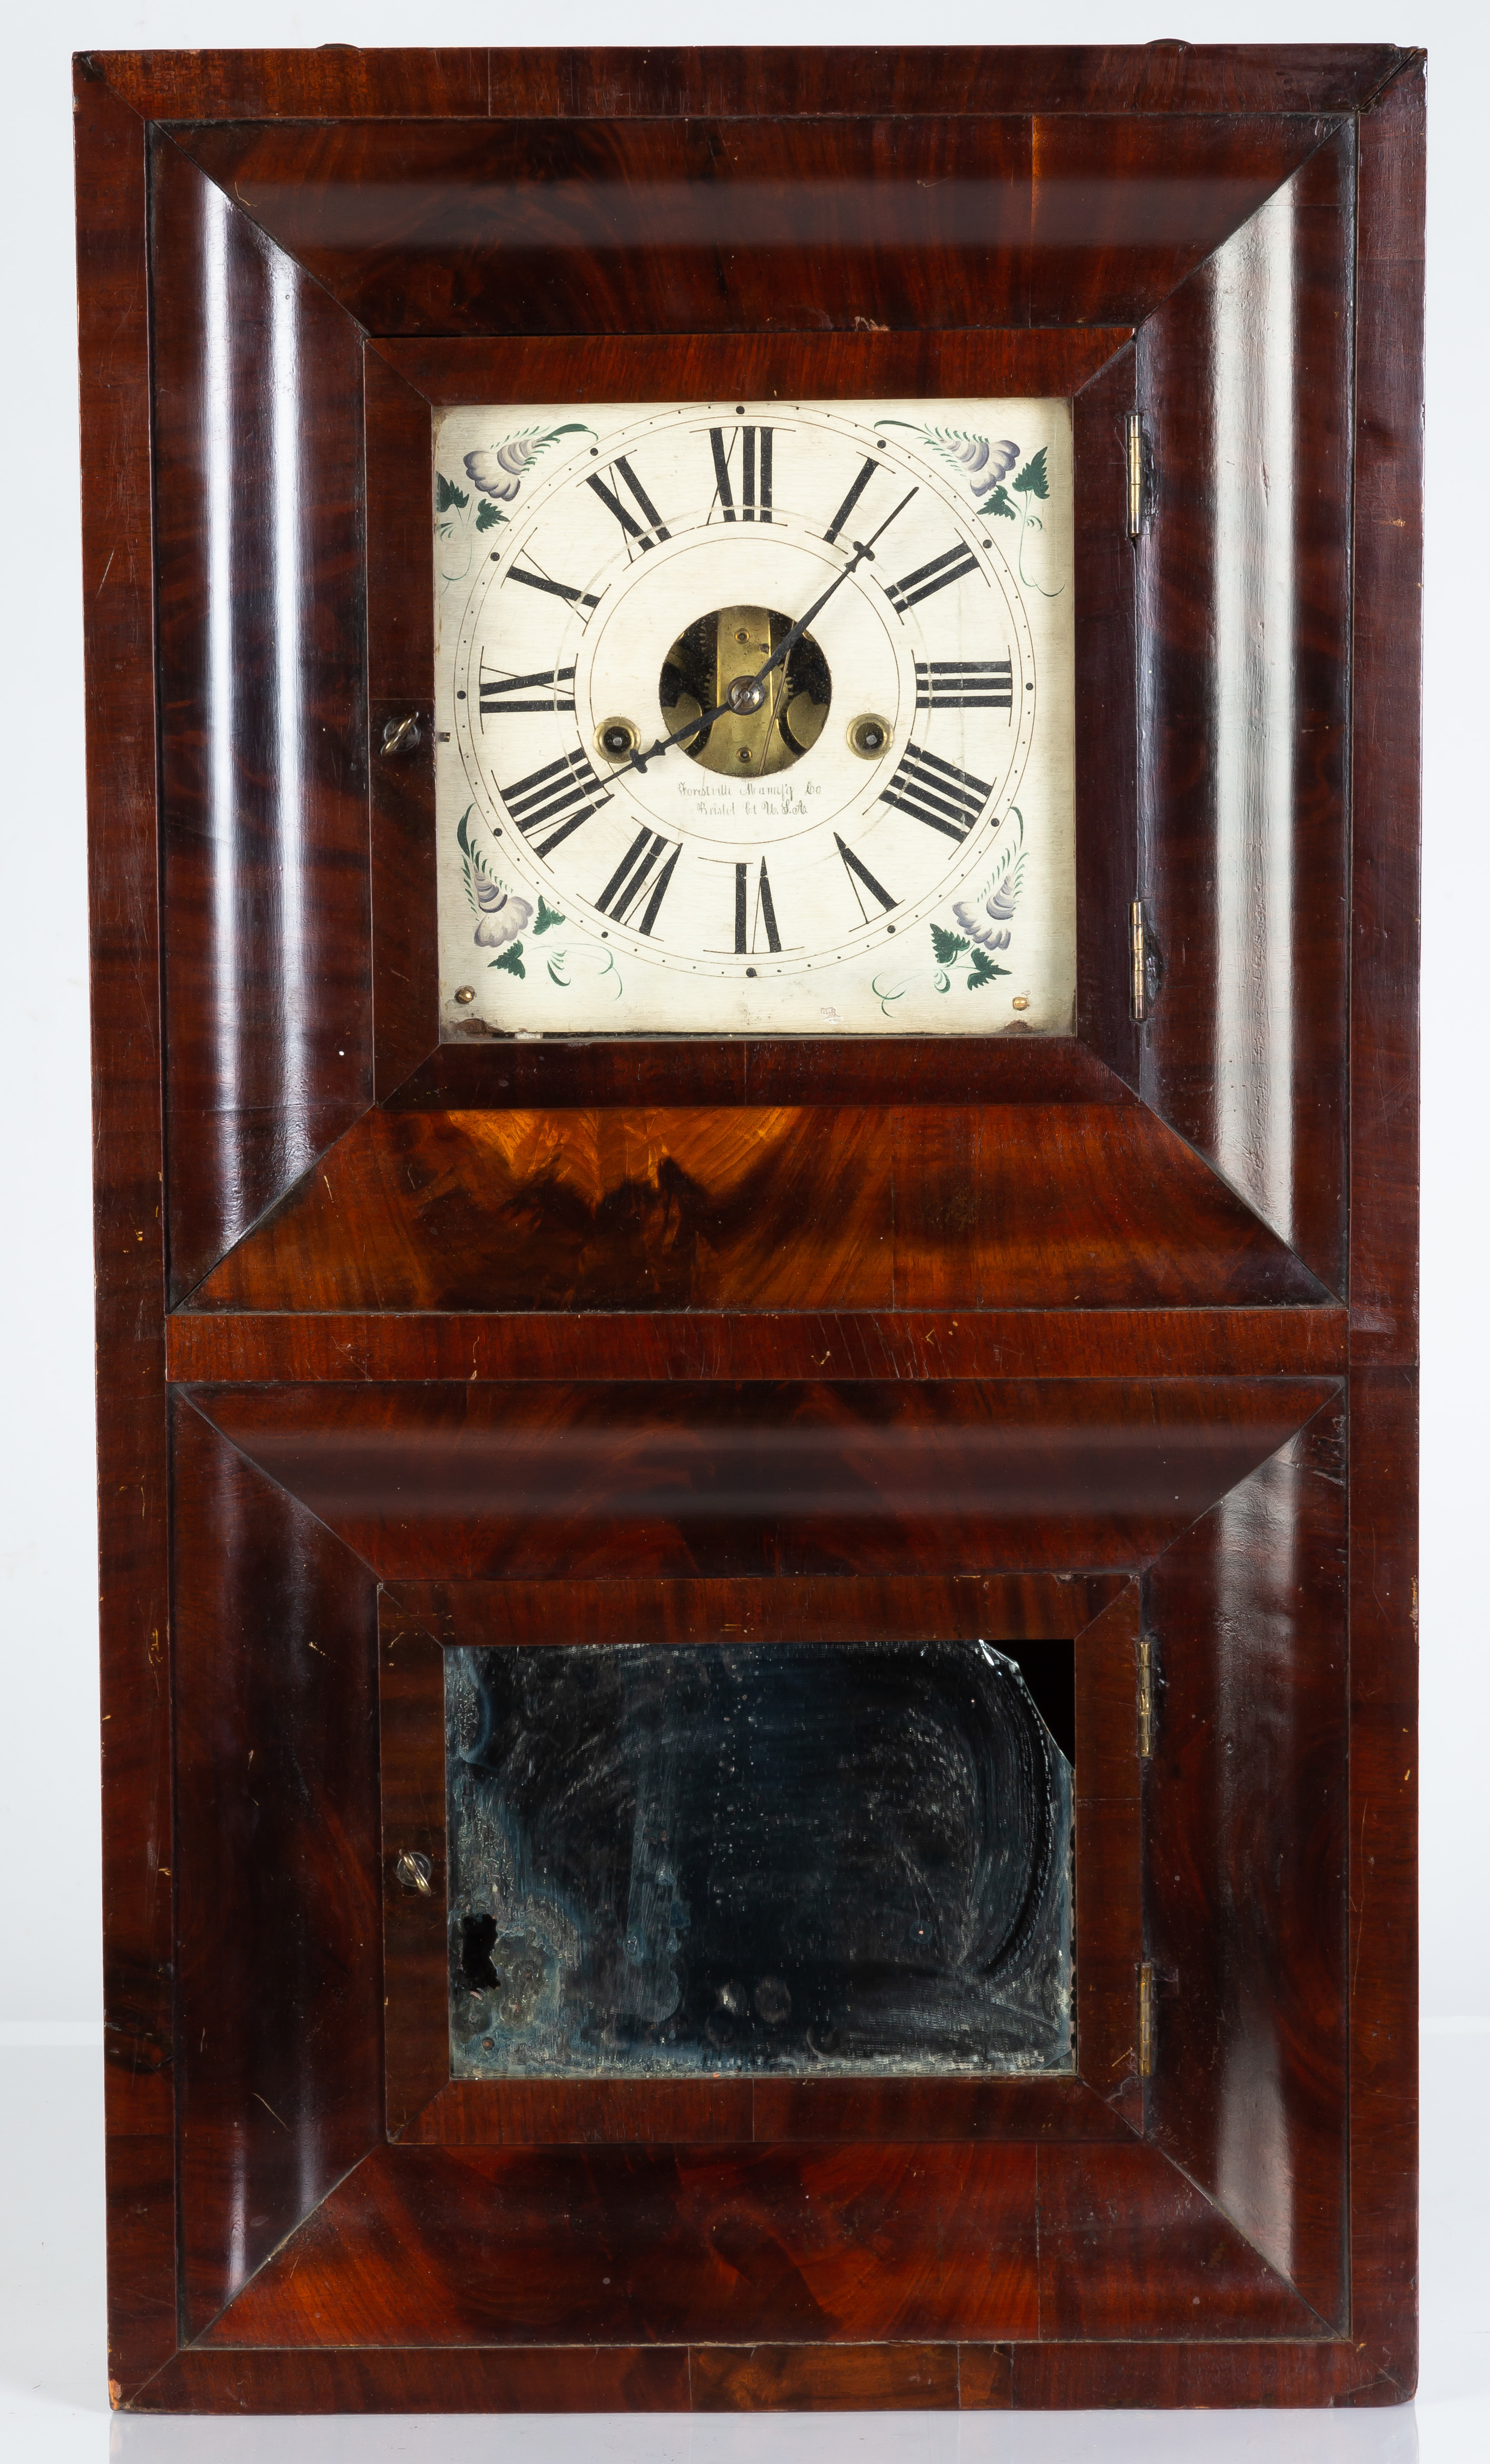 JC BROWN CLOCK COMPANY DOUBLE OGEE 2f3999